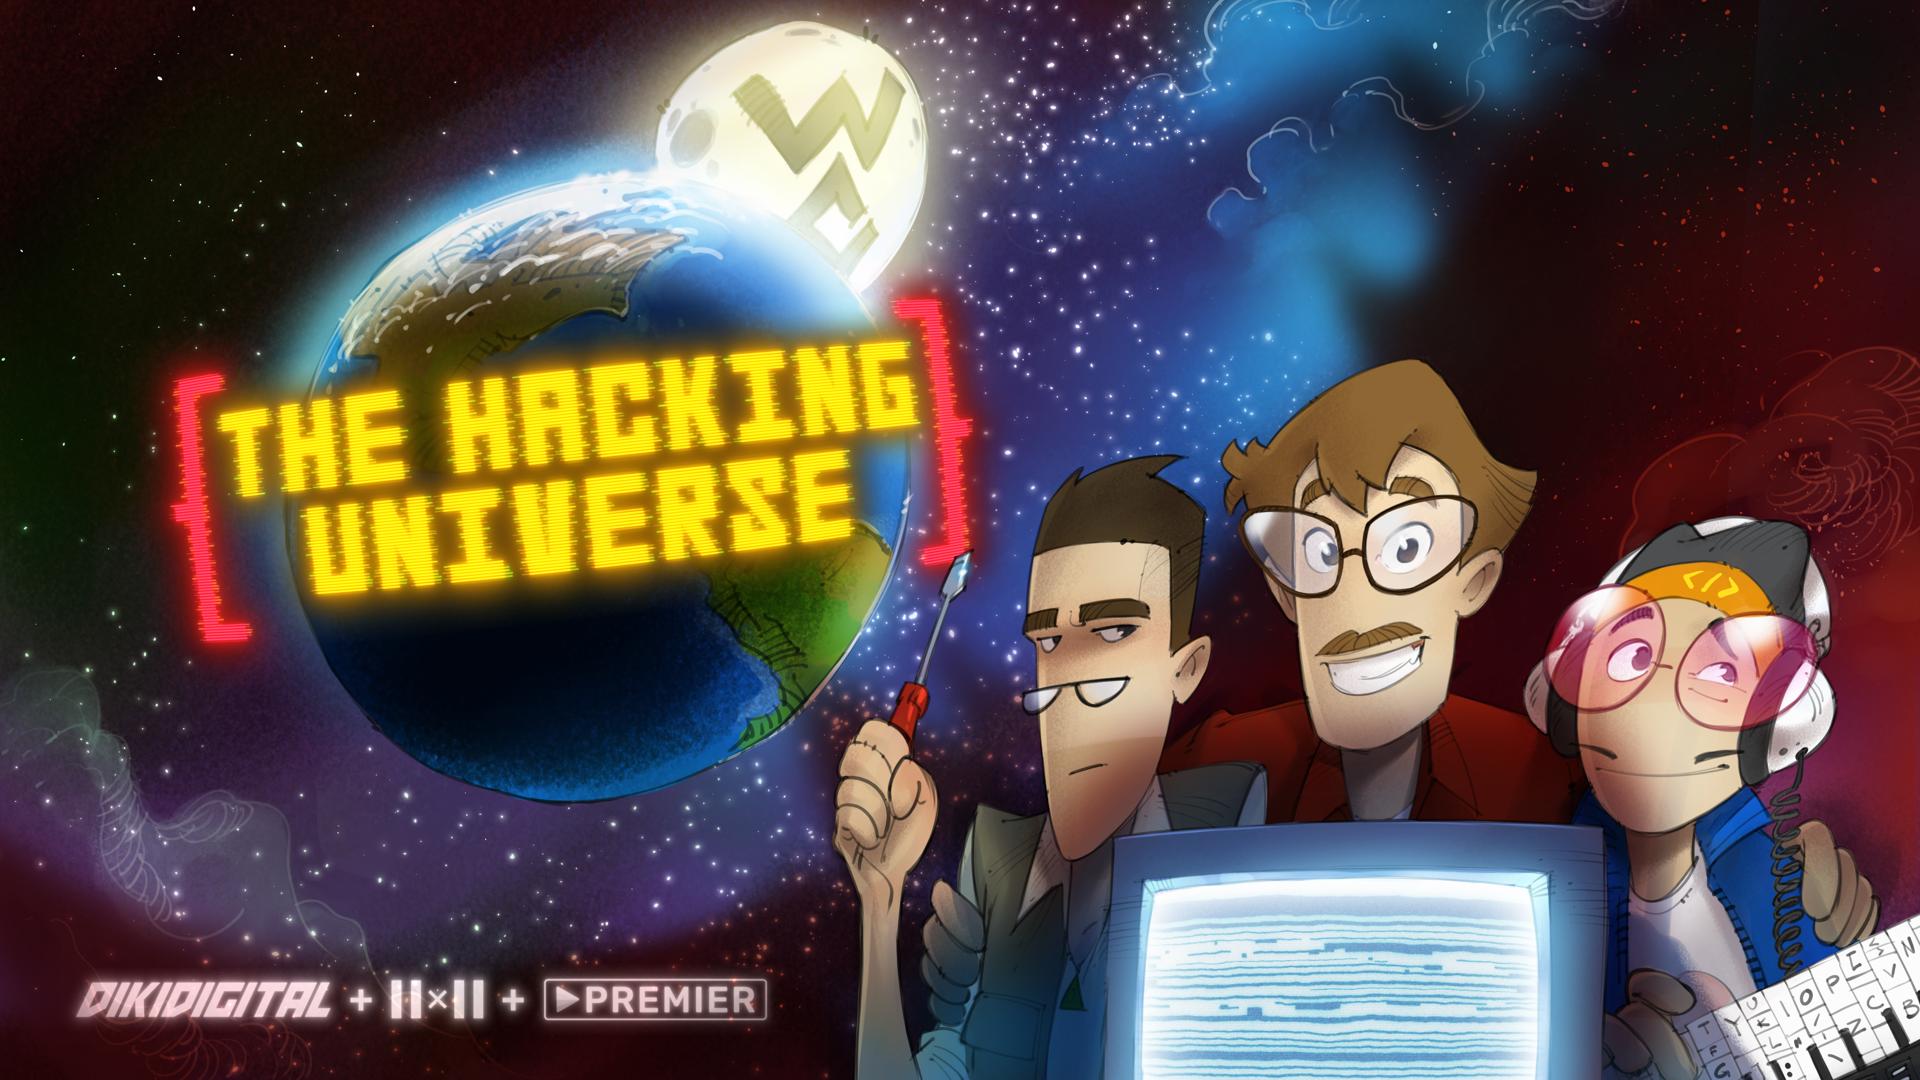 The Hacking Universe